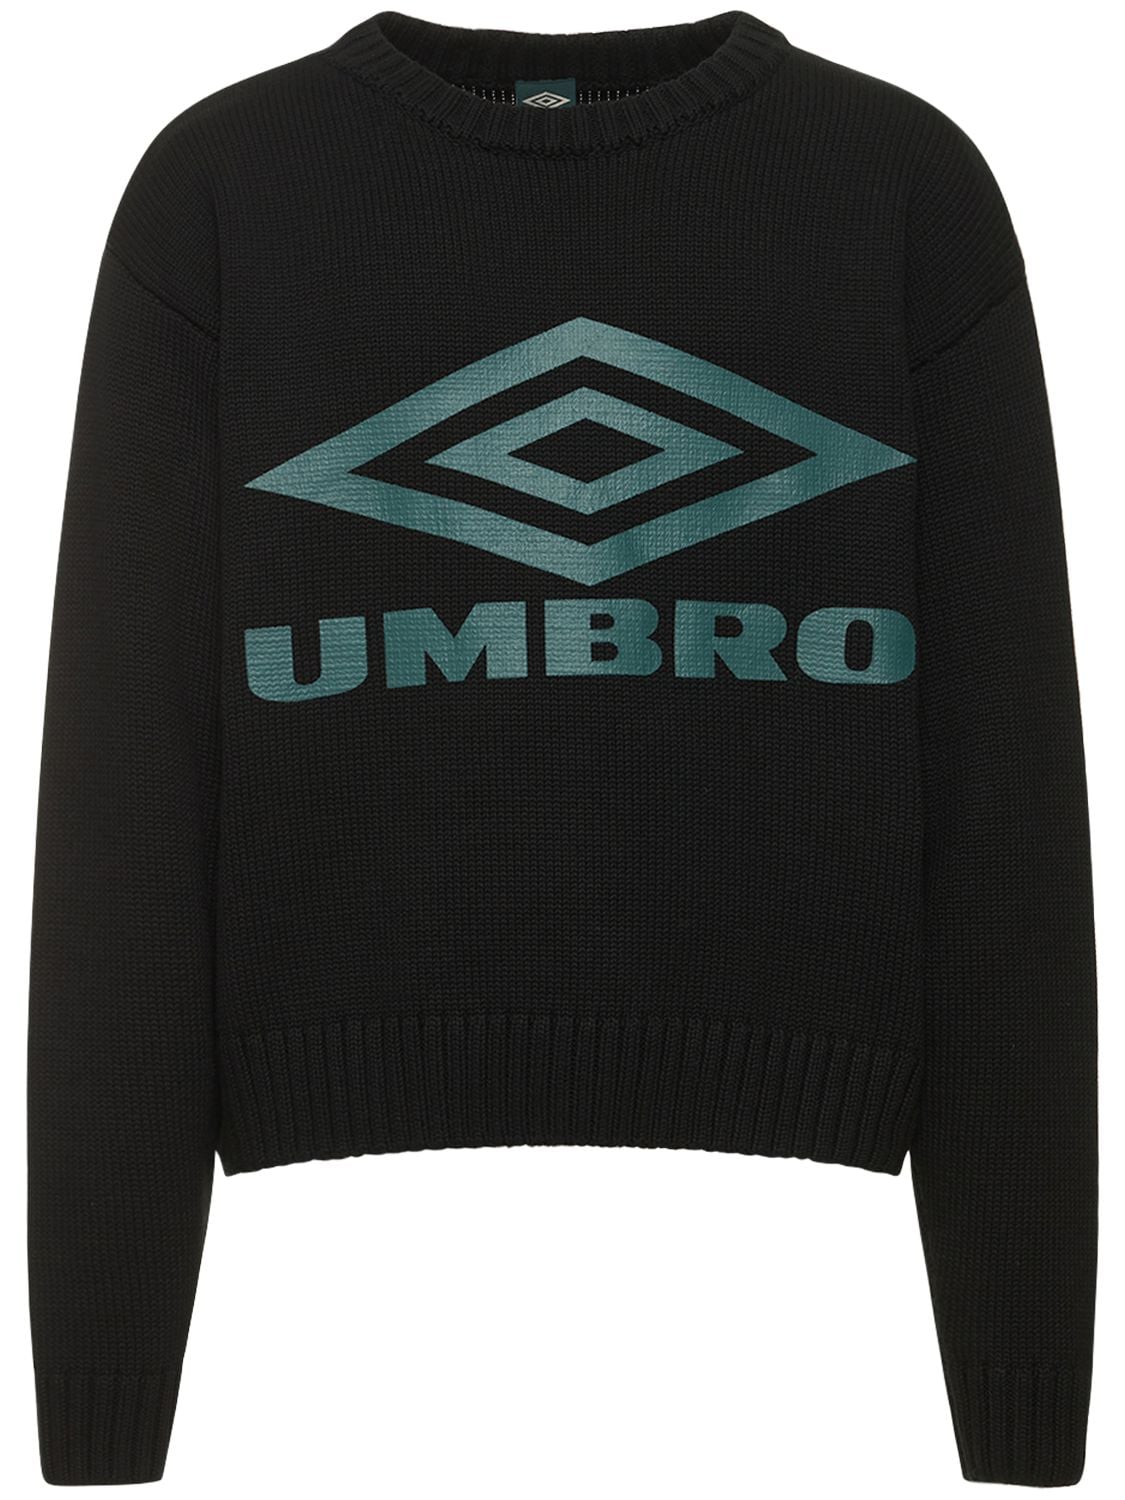 UMBRO KNITTED CREWNECK SWEATER